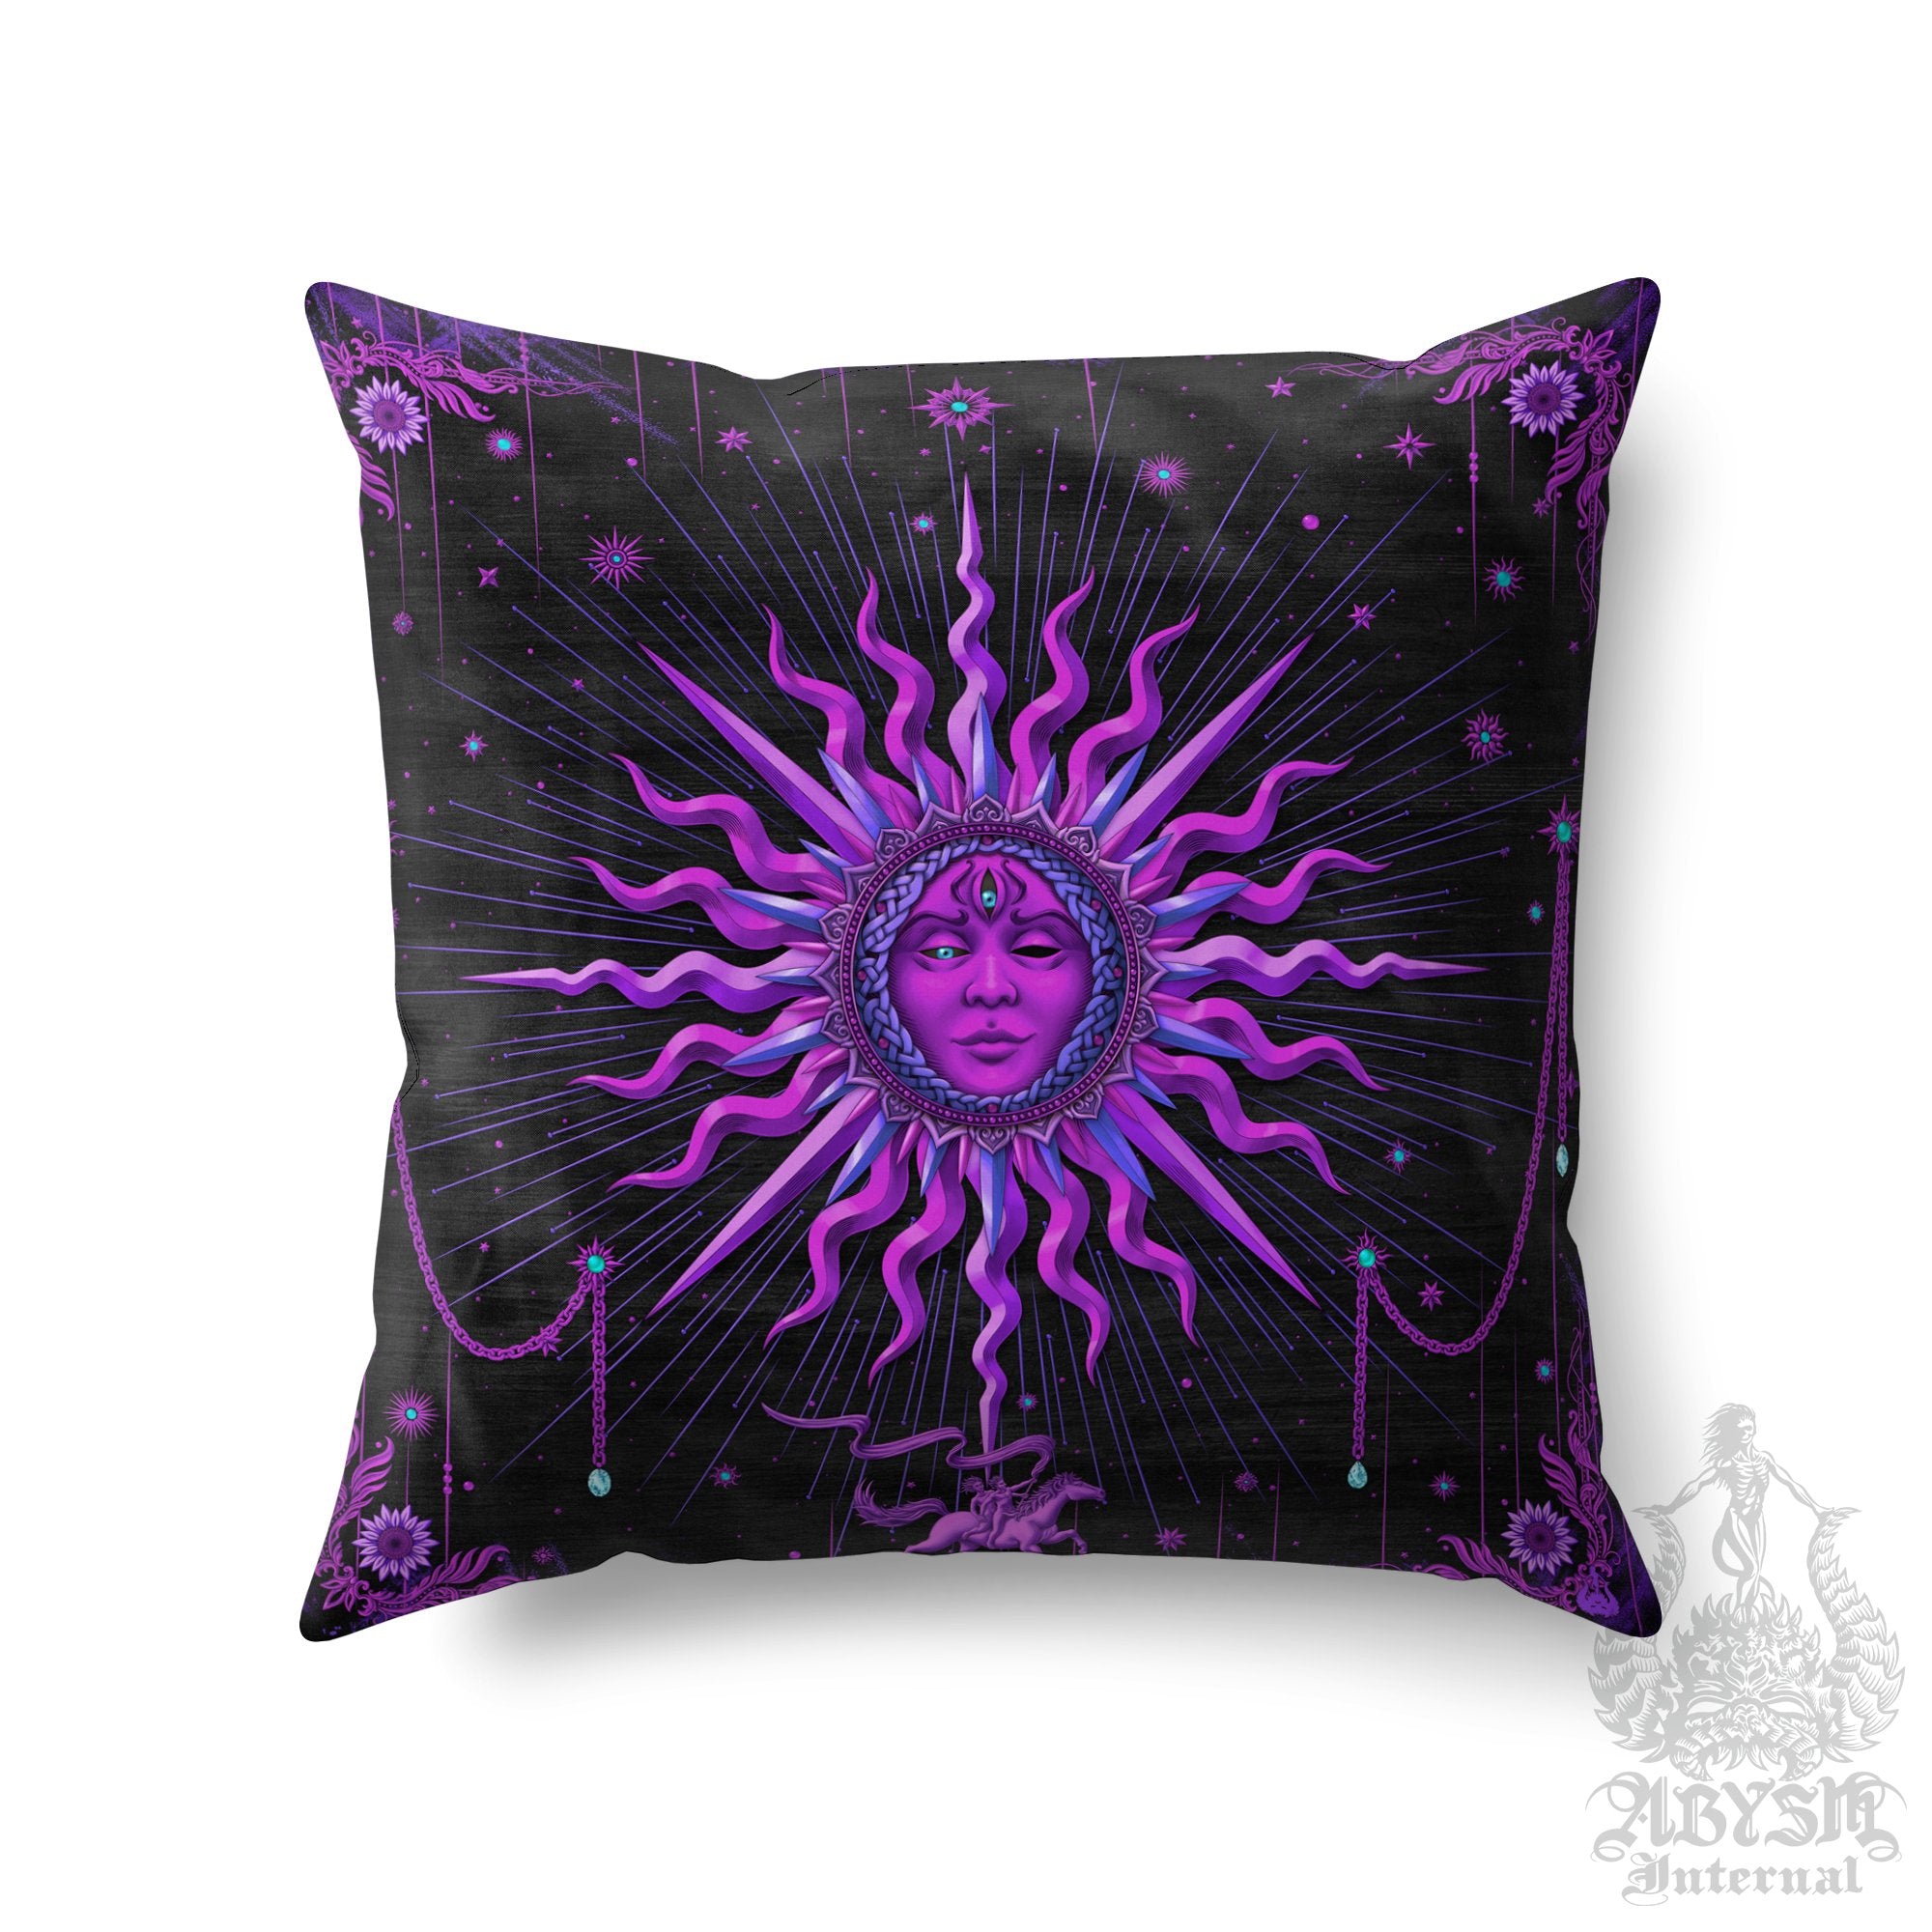 Whimsigoth Throw Pillow, Witchy Decorative Accent Pillow, Purple Sun, Square Cushion Cover, Arcana Tarot Art, Pastel Goth Home, Fortune & Magic Room Decor - Abysm Internal